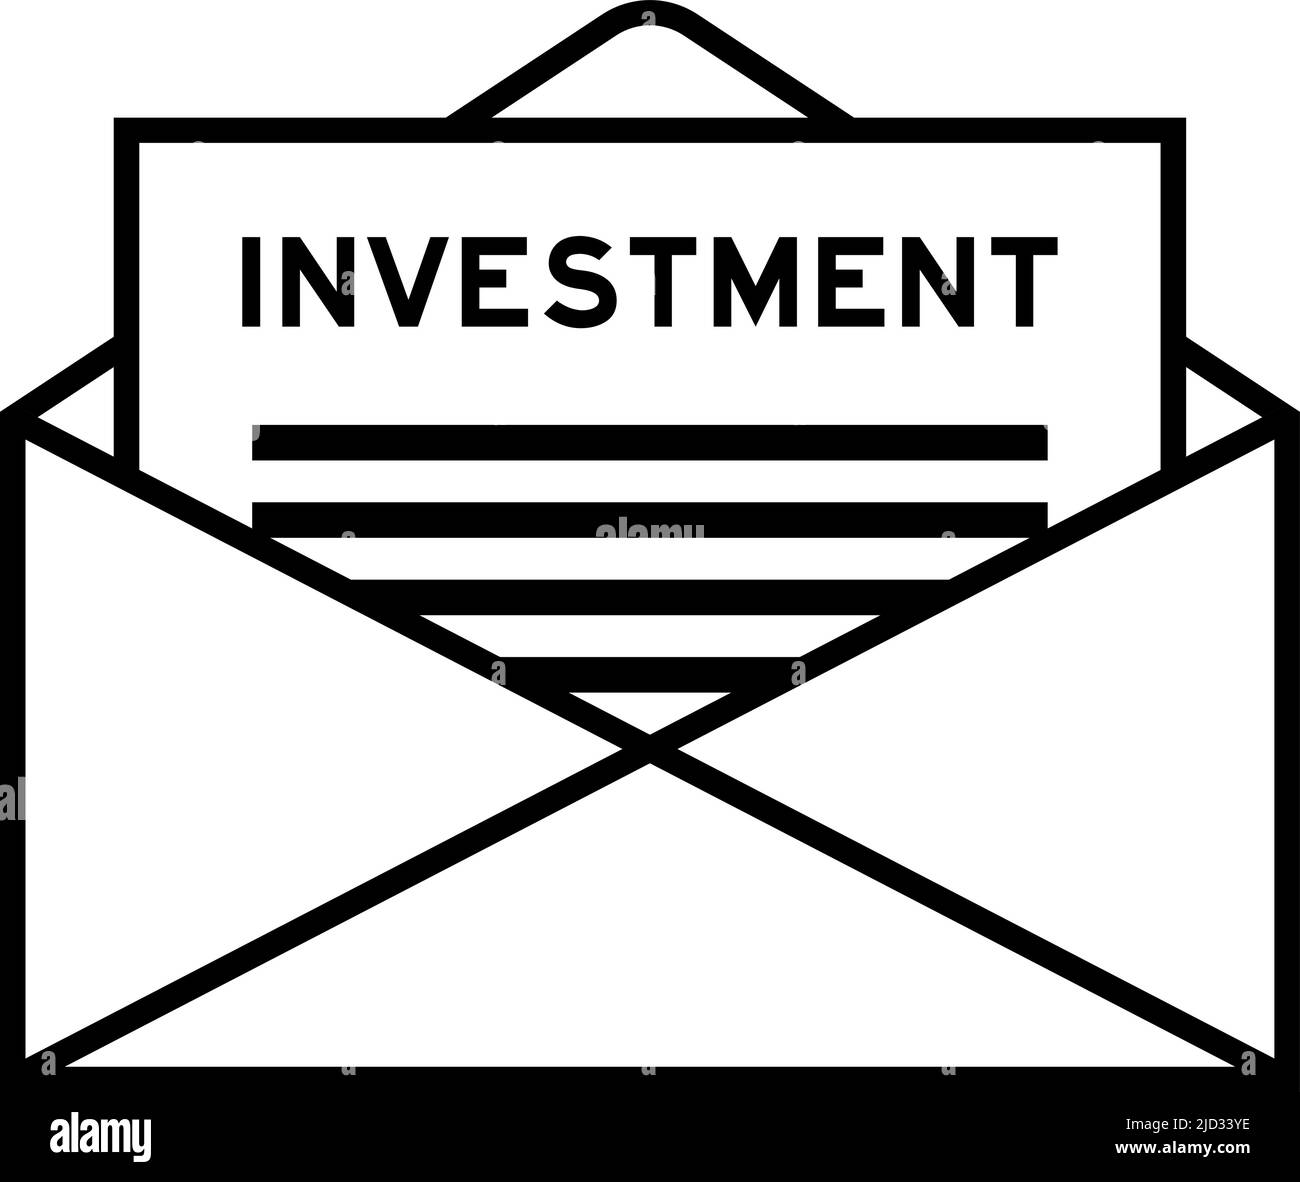 Envelope and letter sign with word investment as the headline Stock Vector